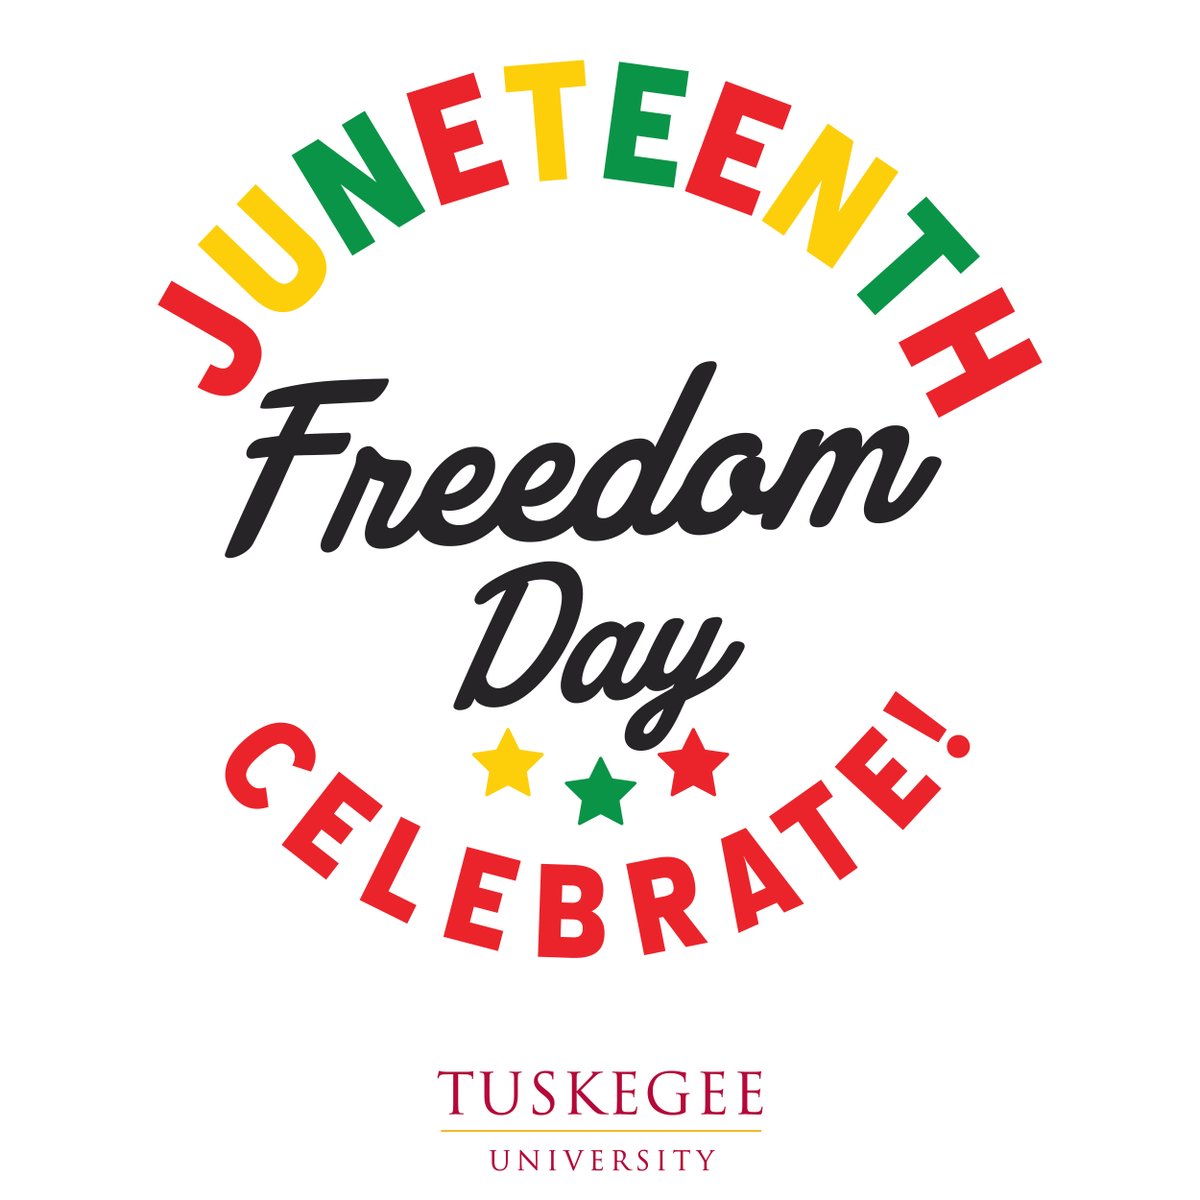 Happy Juneteenth from Tuskegee University! ❤️💚💛🖤 #OneTuskegee #Juneteenth